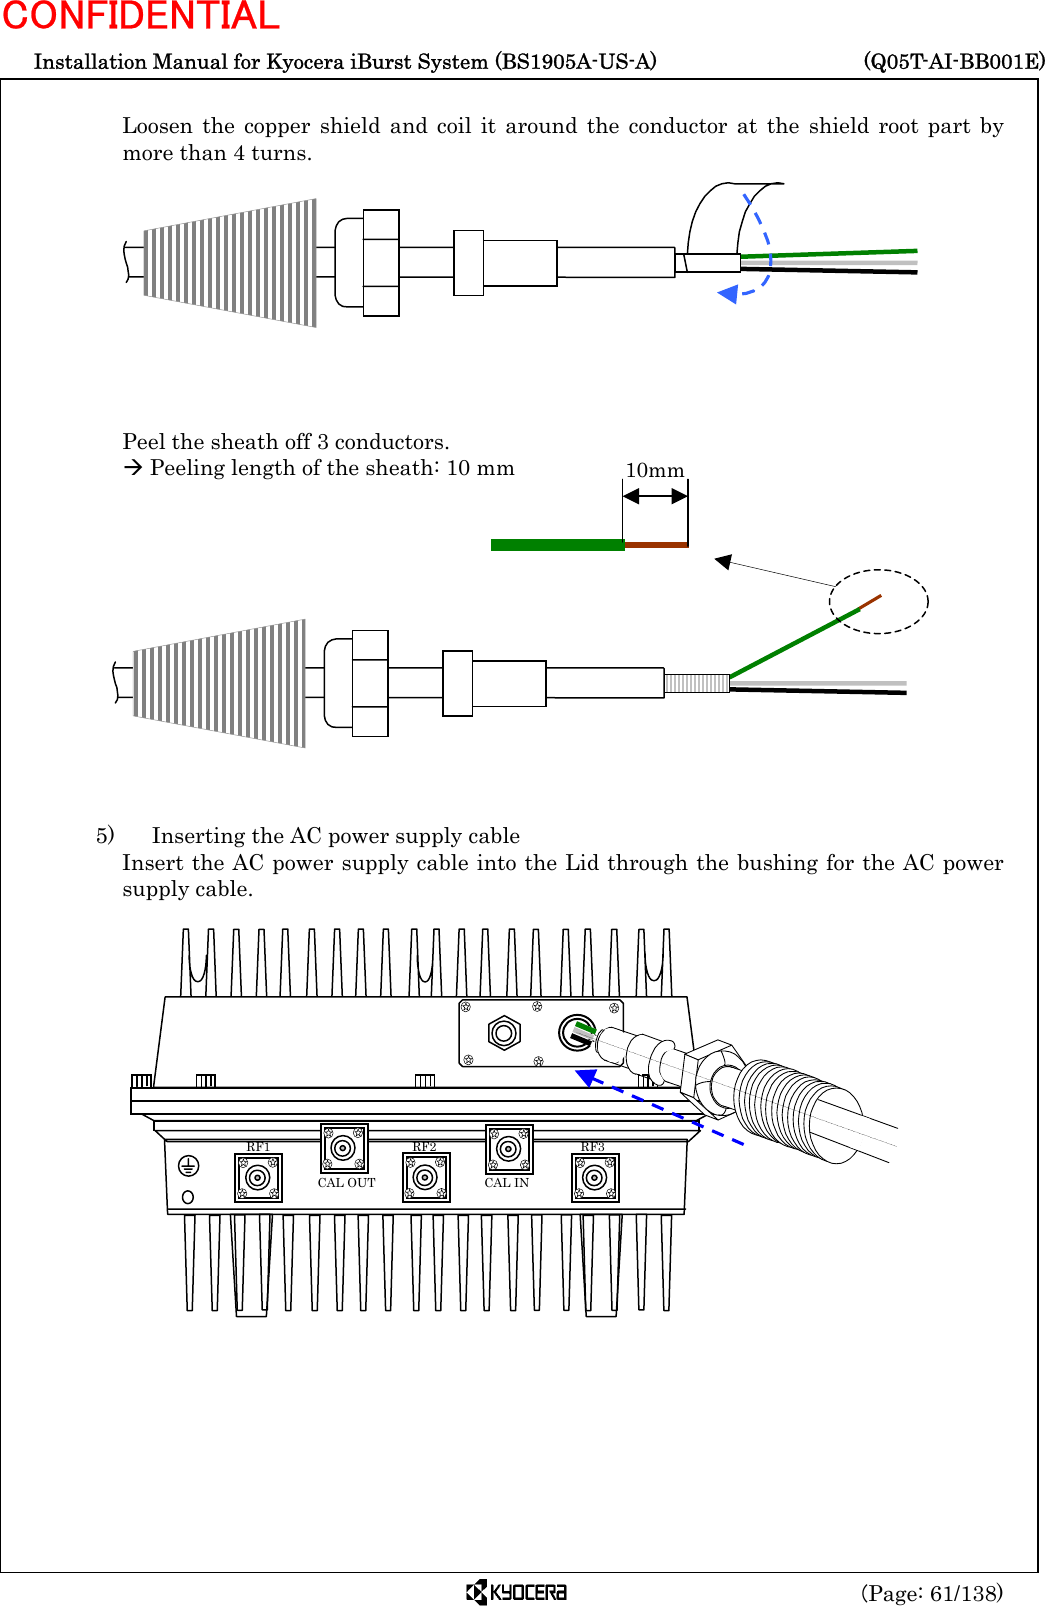  Installation Manual for Kyocera iBurst System (BS1905A-US-A)     (Q05T-AI-BB001E) (Page: 61/138) CONFIDENTIAL  Loosen the copper shield and coil it around the conductor at the shield root part by more than 4 turns.           Peel the sheath off 3 conductors. Æ Peeling length of the sheath: 10 mm              5)    Inserting the AC power supply cable Insert the AC power supply cable into the Lid through the bushing for the AC power supply cable.                           RF3 RF2 RF1 CAL OUT  CAL IN 10mm 